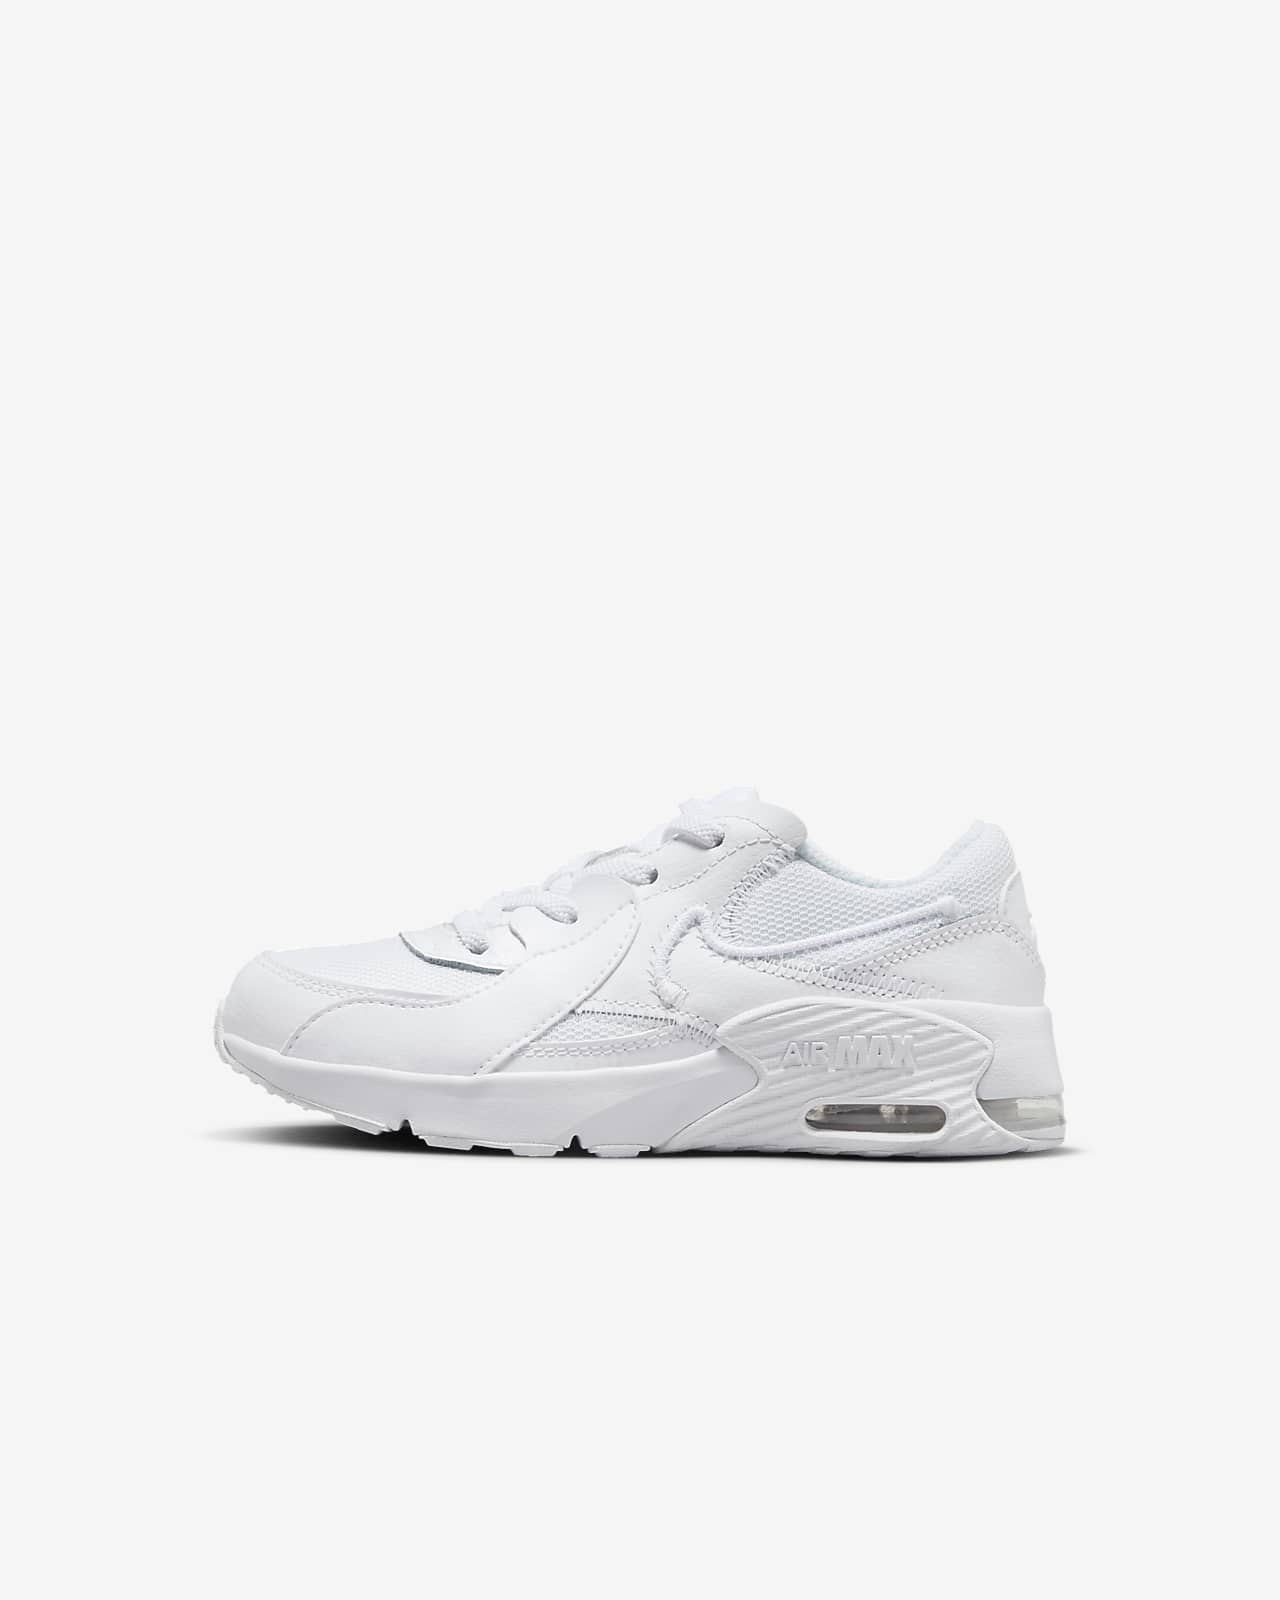 Chaussure Nike Air Max Excee pour enfant